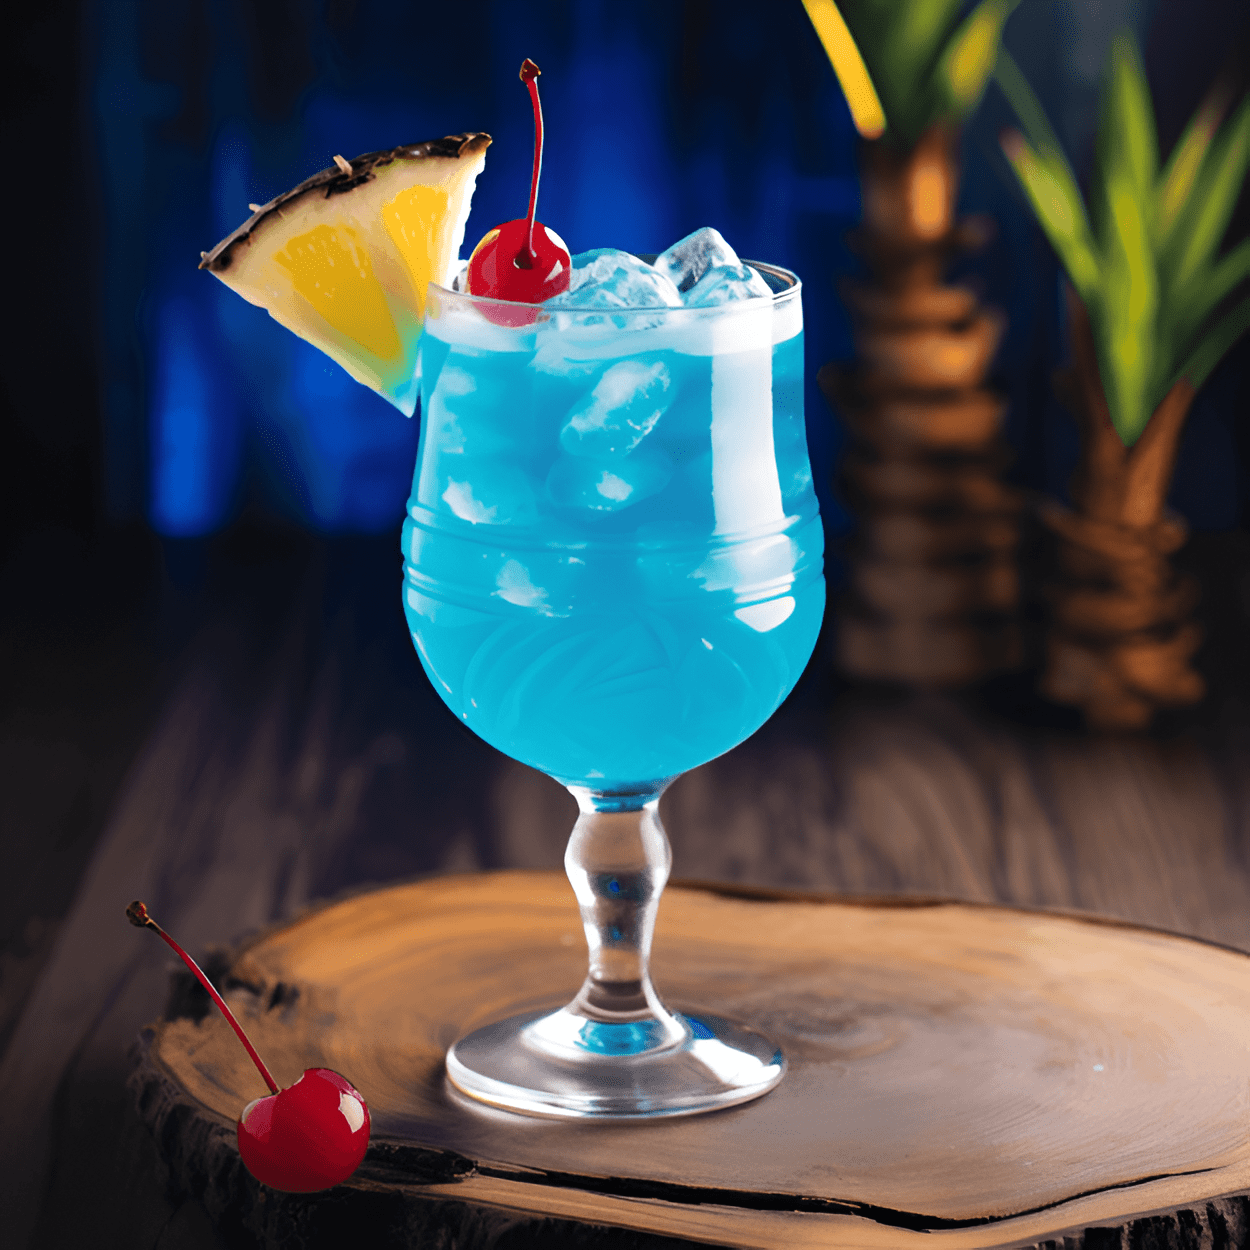 Blue Ball Cocktail Recipe - The Blue Ball cocktail is a sweet, fruity cocktail with a vibrant blue color. It has a strong citrus flavor, with a hint of coconut and a slight tang from the pineapple. The blue curacao gives it a unique, tropical taste that is both refreshing and delicious.